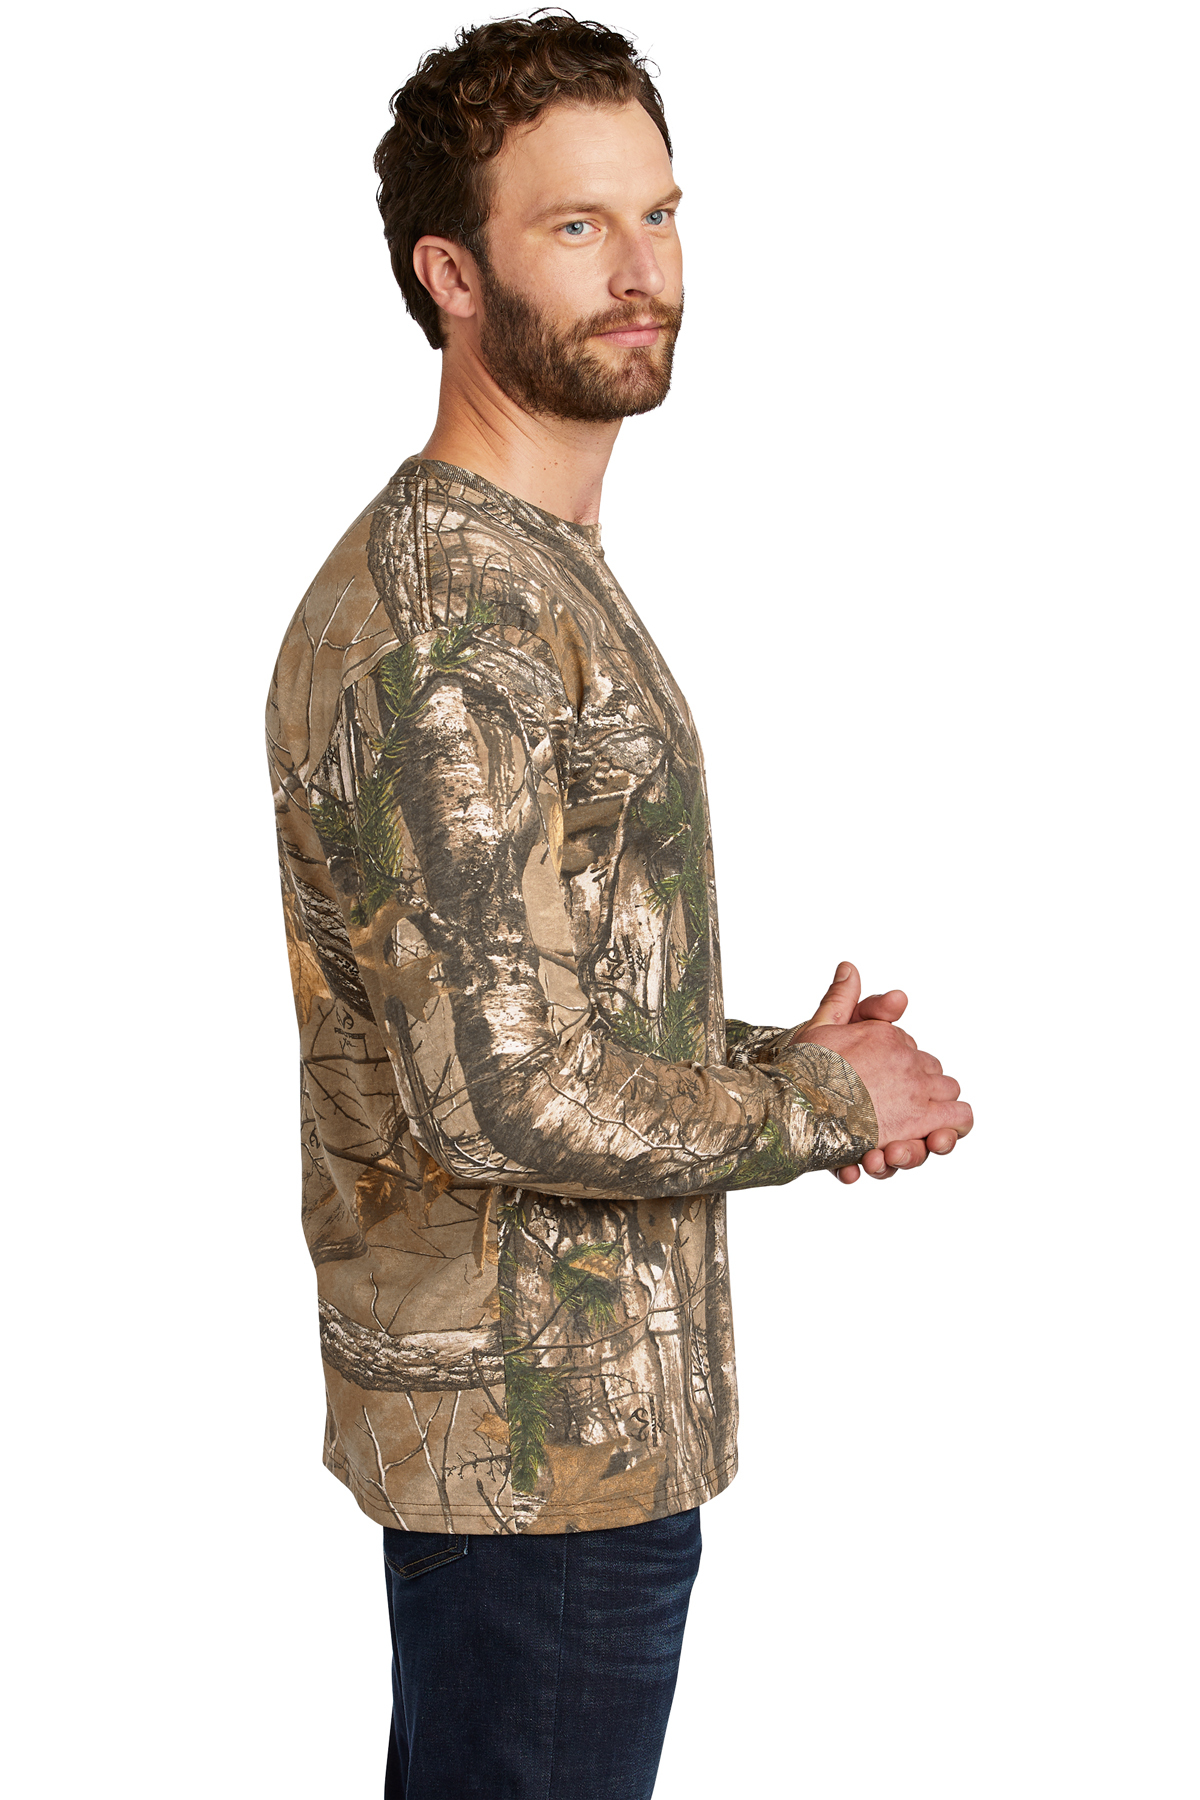 Russell Outdoors Realtree Long Sleeve Explorer 100% Cotton T-Shirt